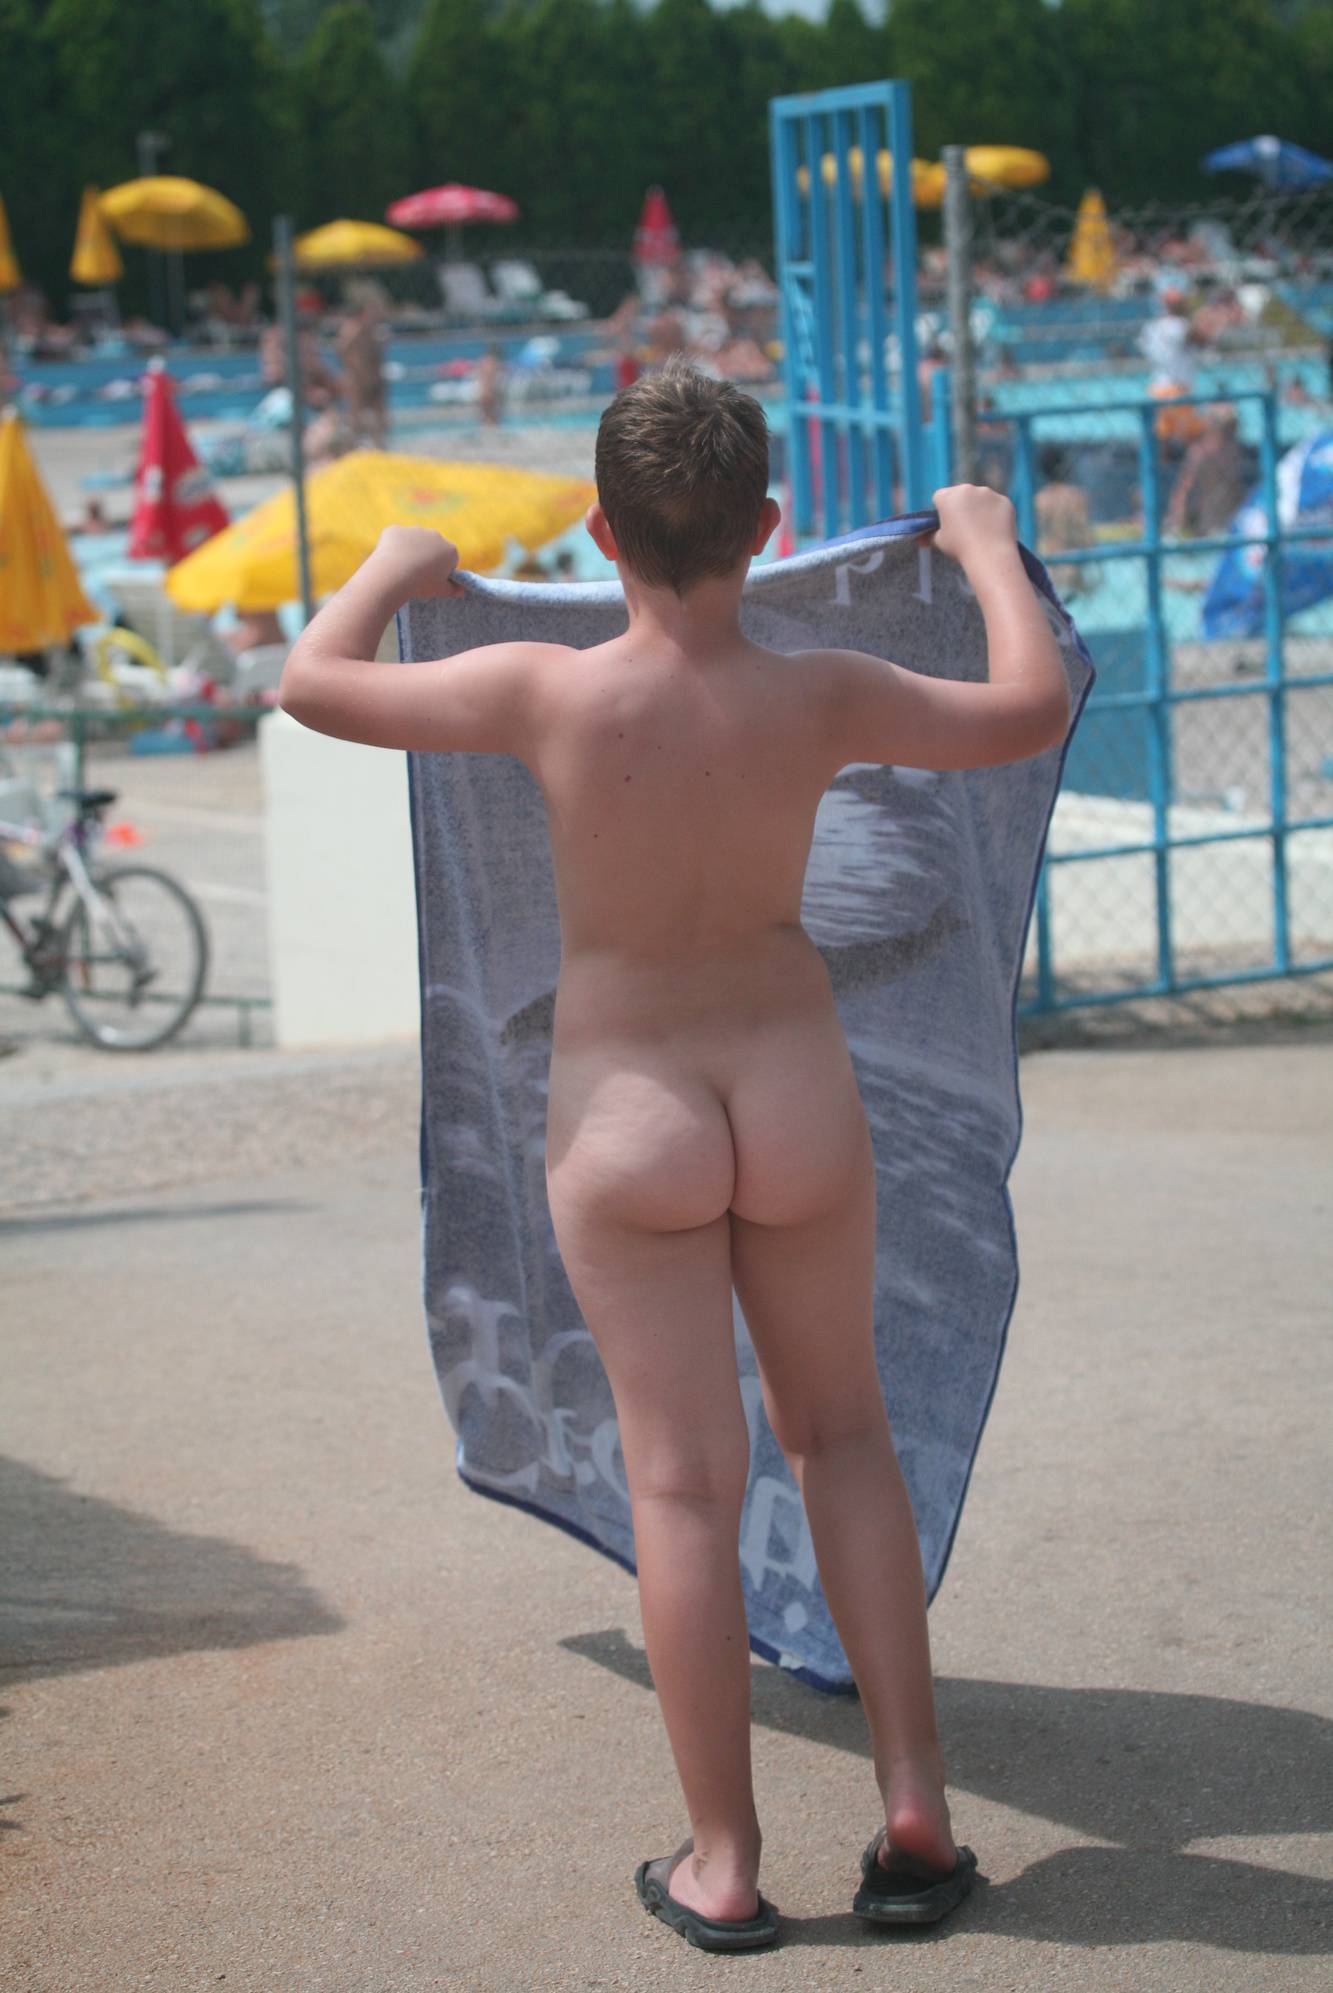 Naturist Pool Exit Stand-By - 4